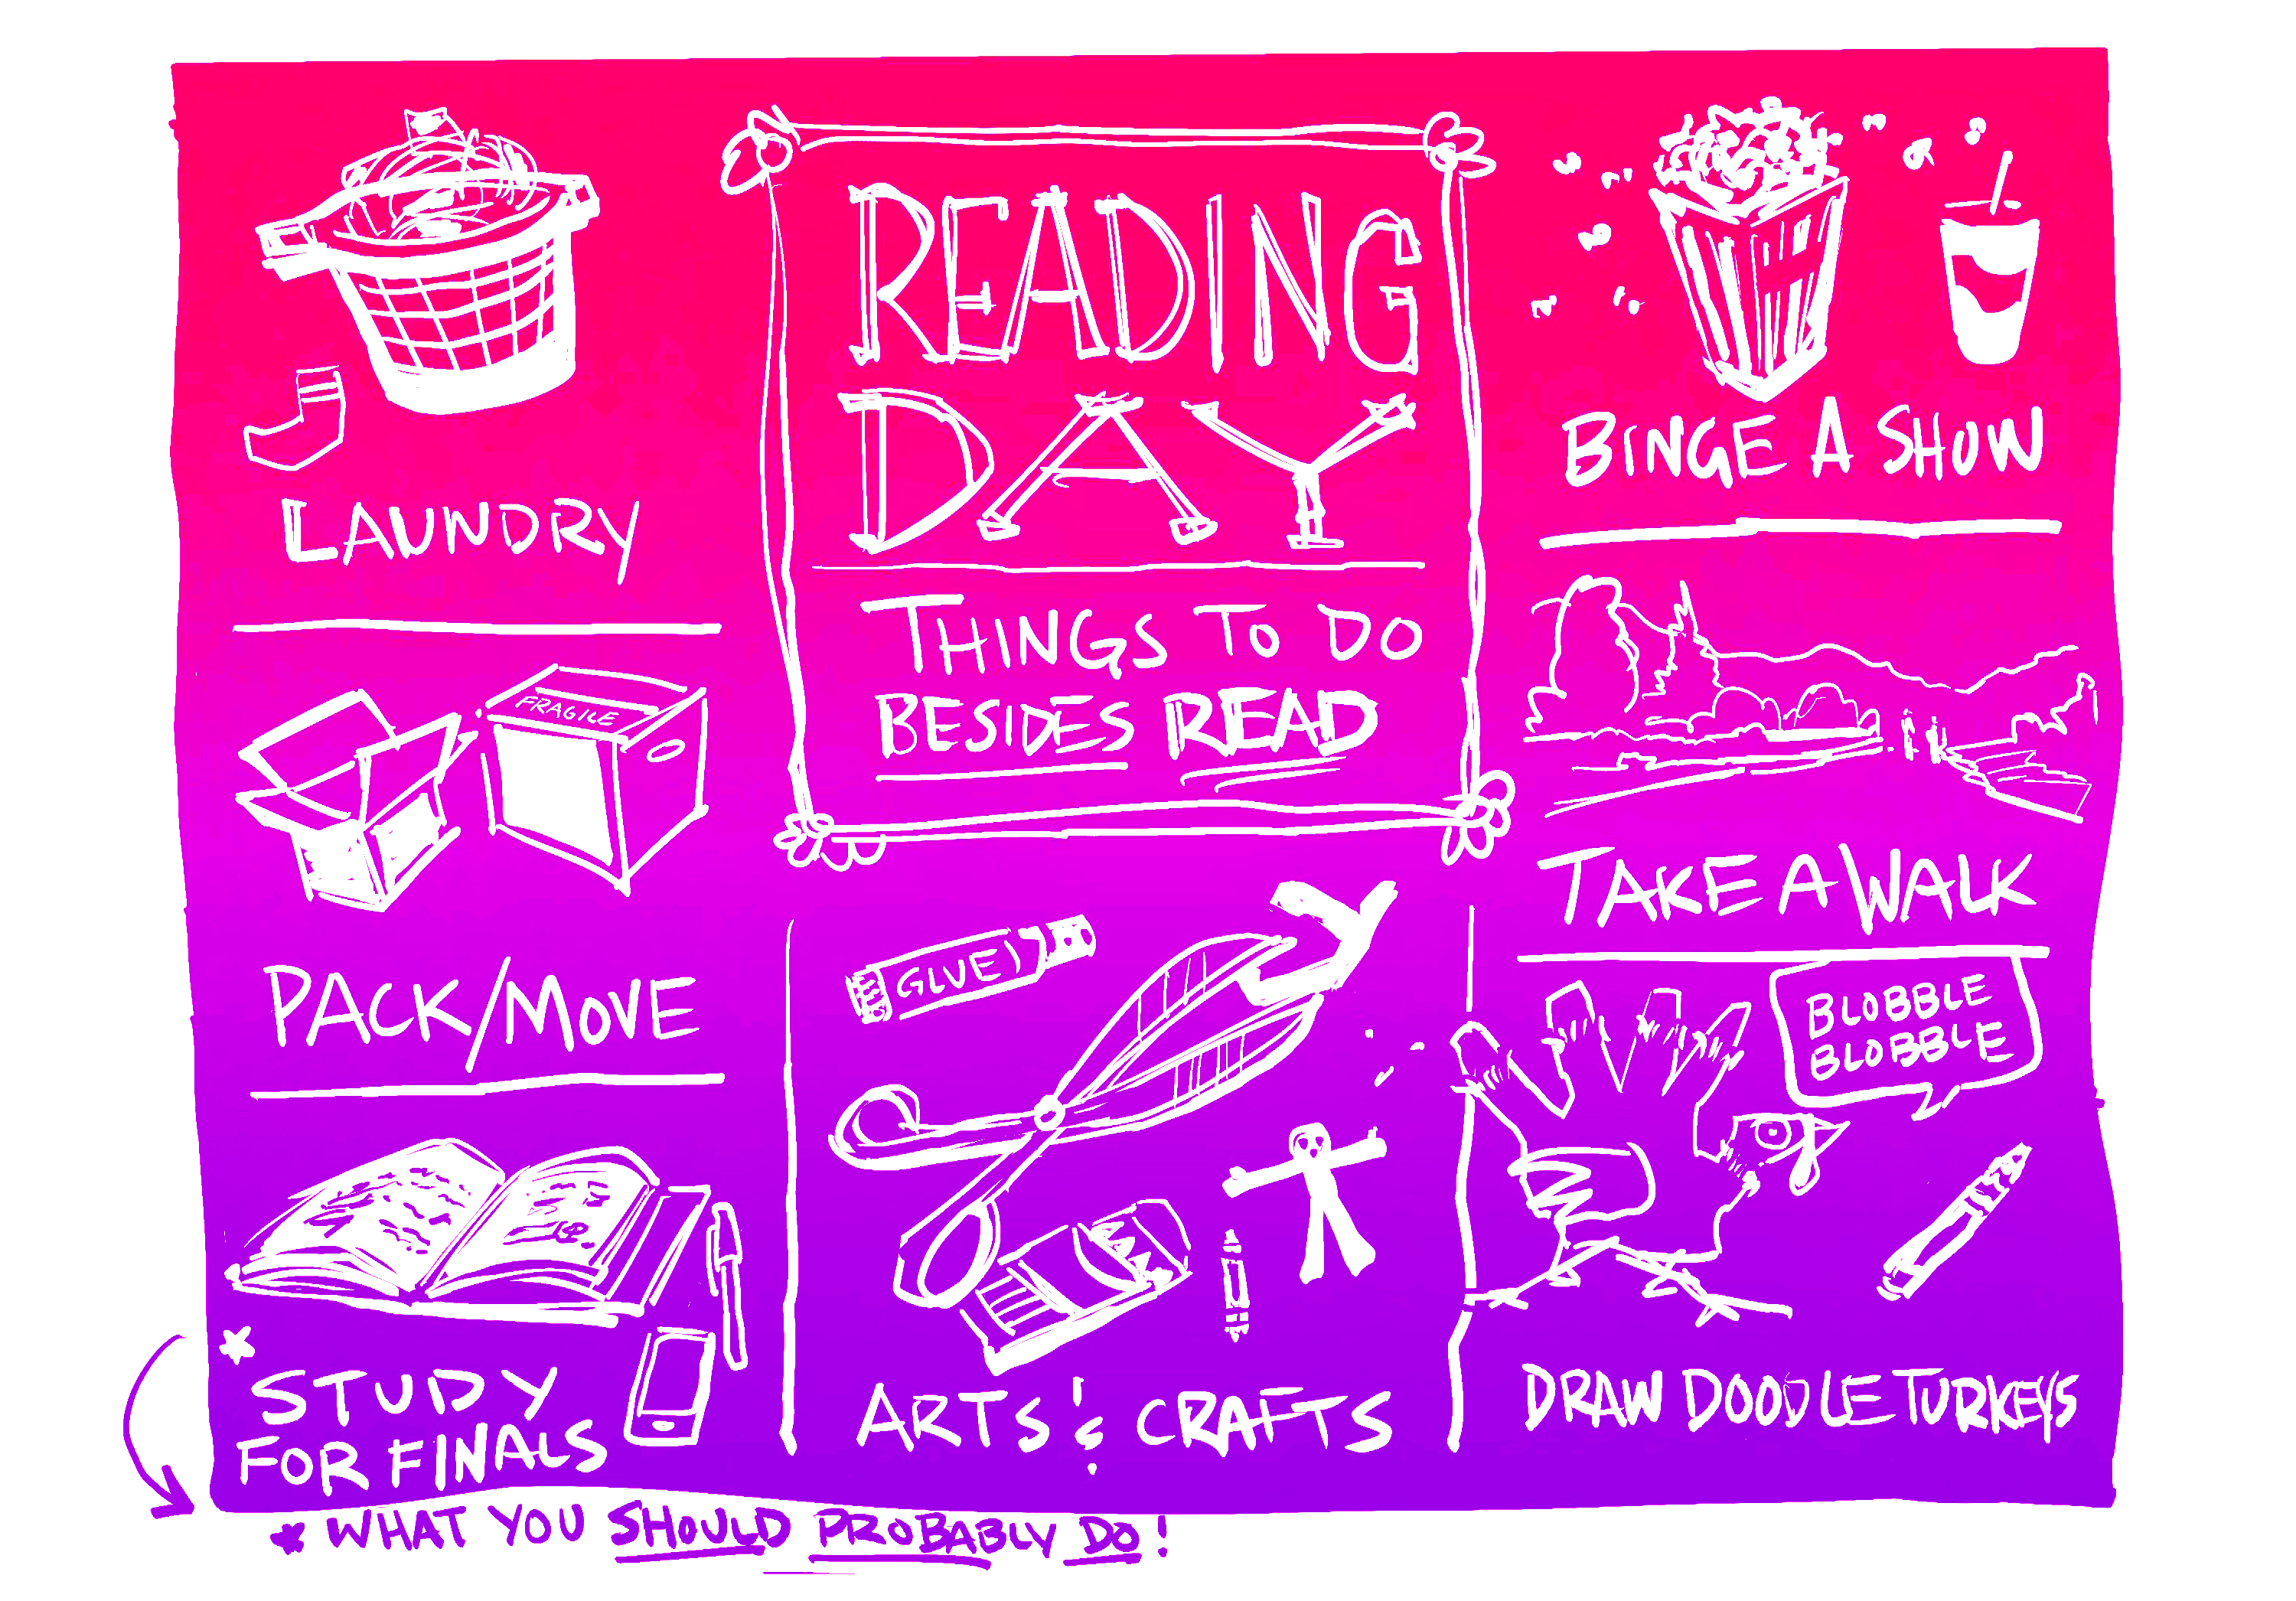 Digital sketch of things to do besides reading on reading day: laundry, pack/move, study for finals, binge a show, take a walk, arts and crafts, and draw a doodle turkey